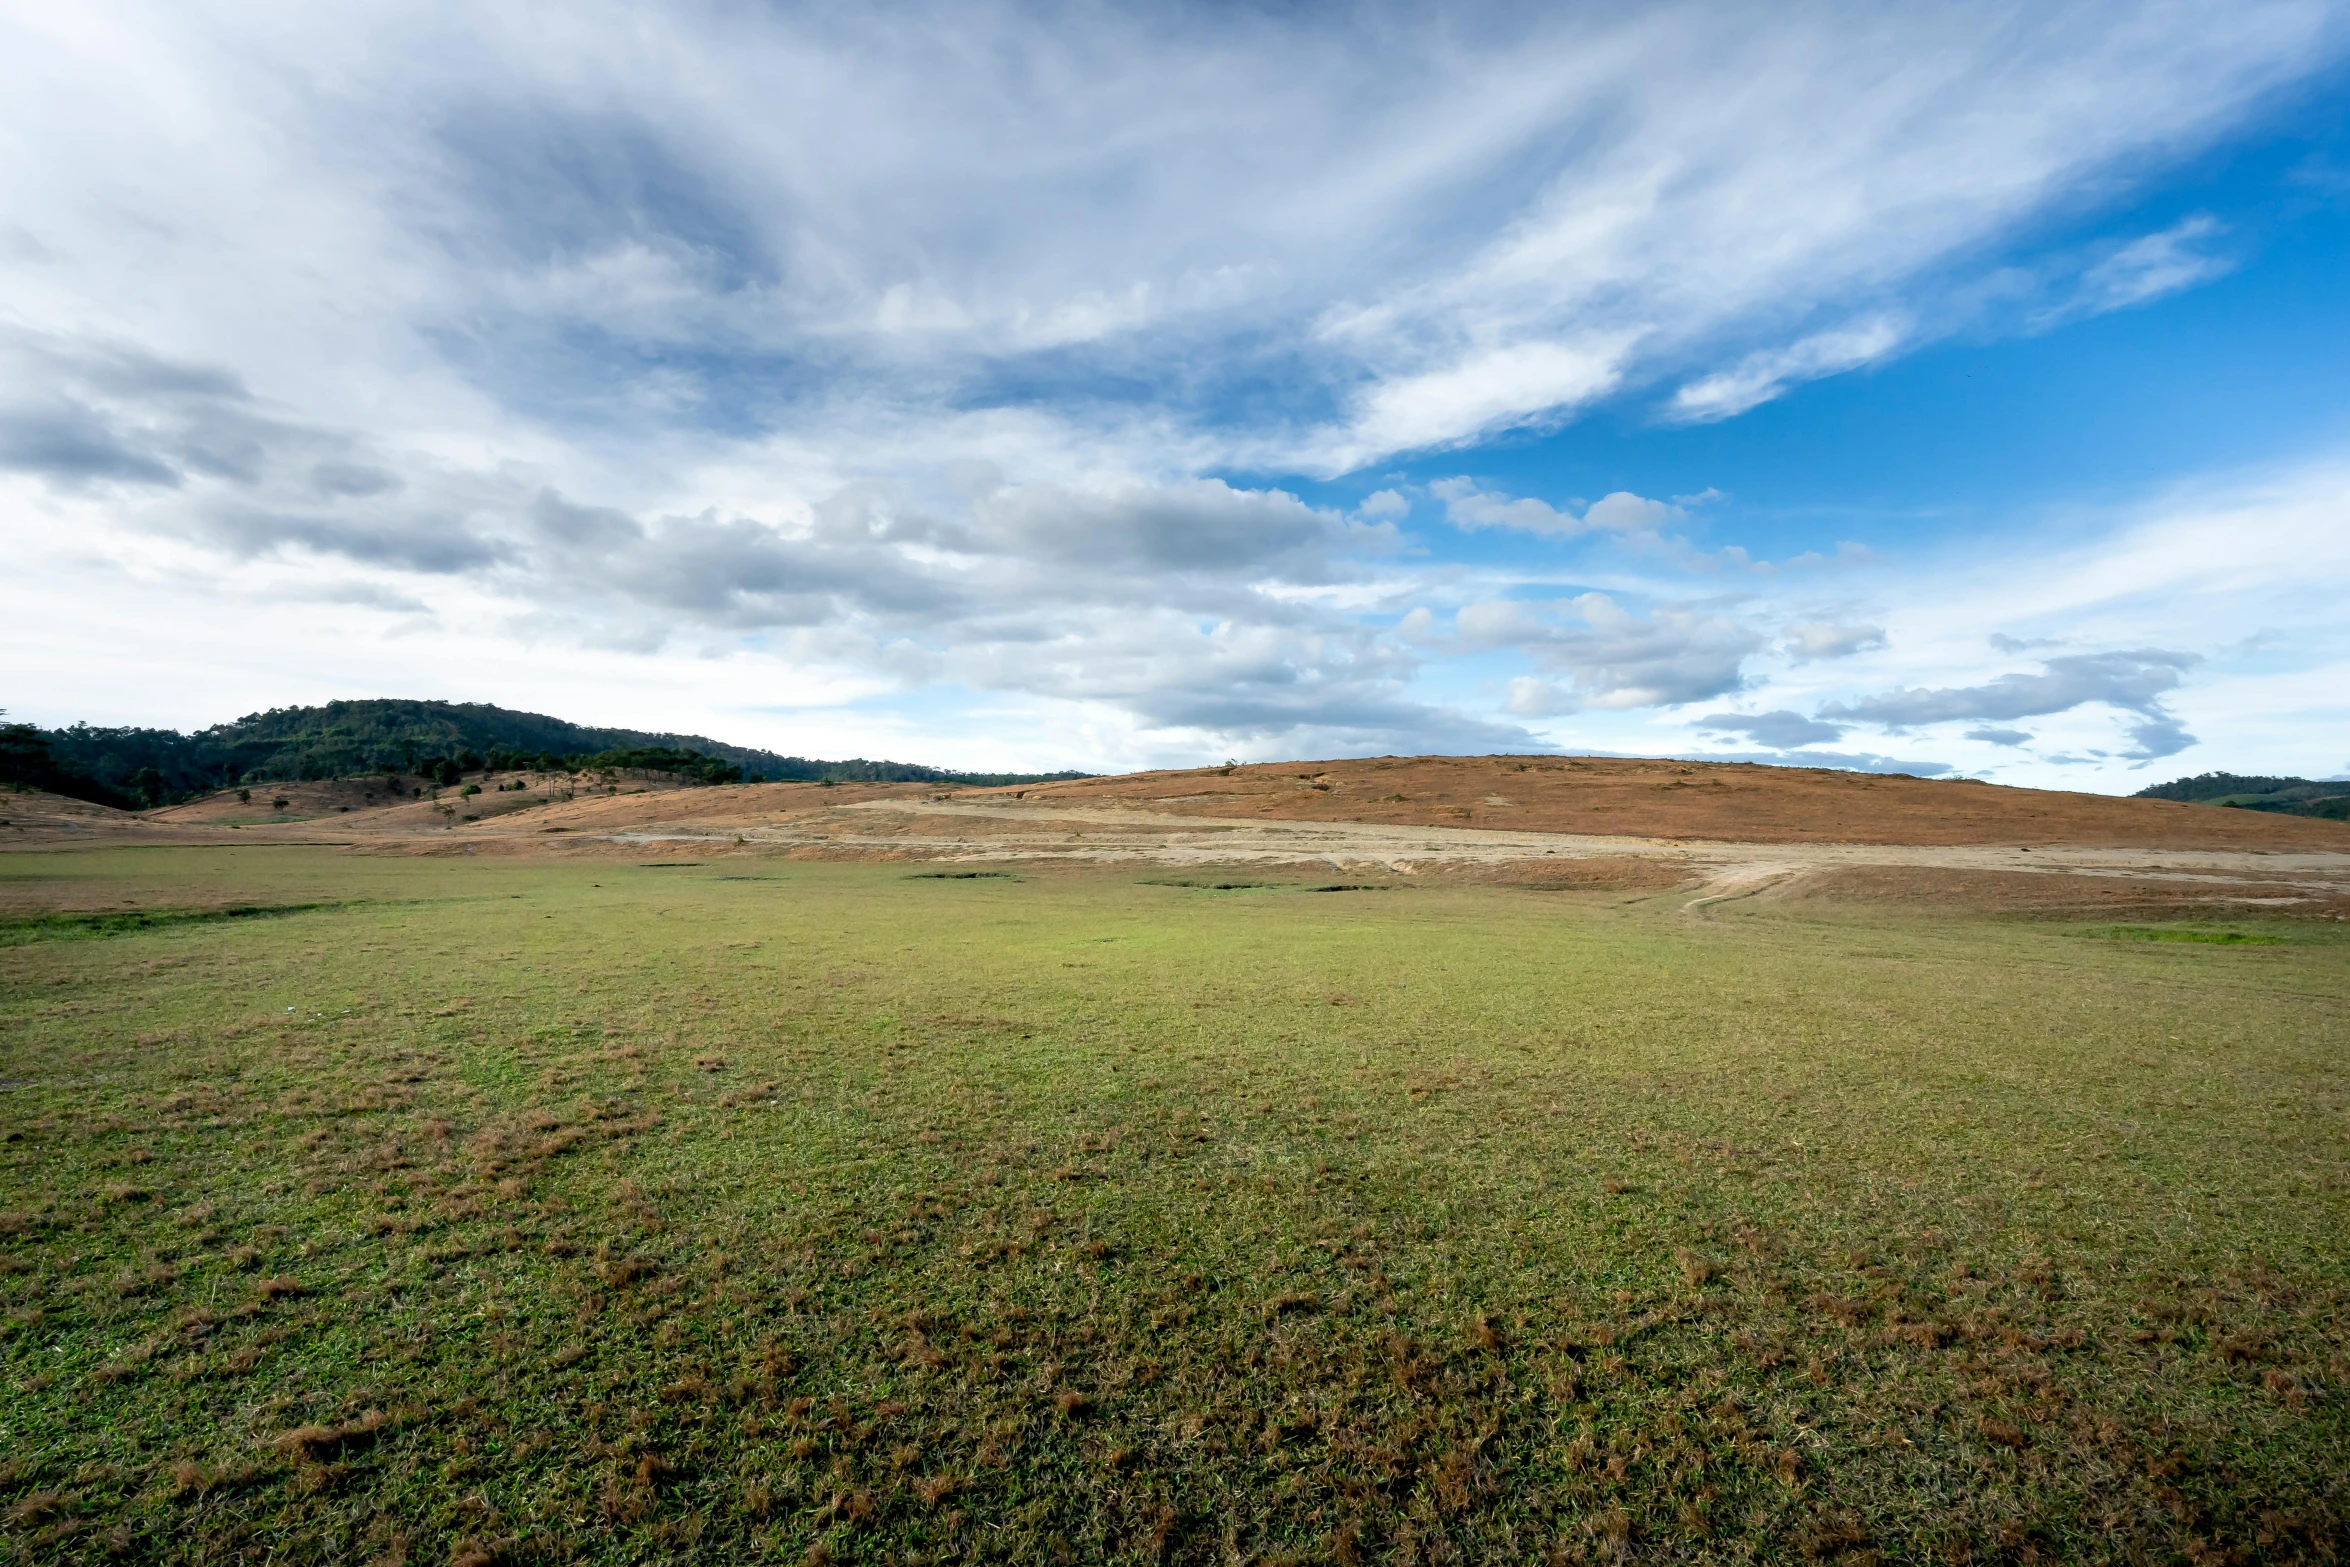 an empty grassy field with hills in the distance